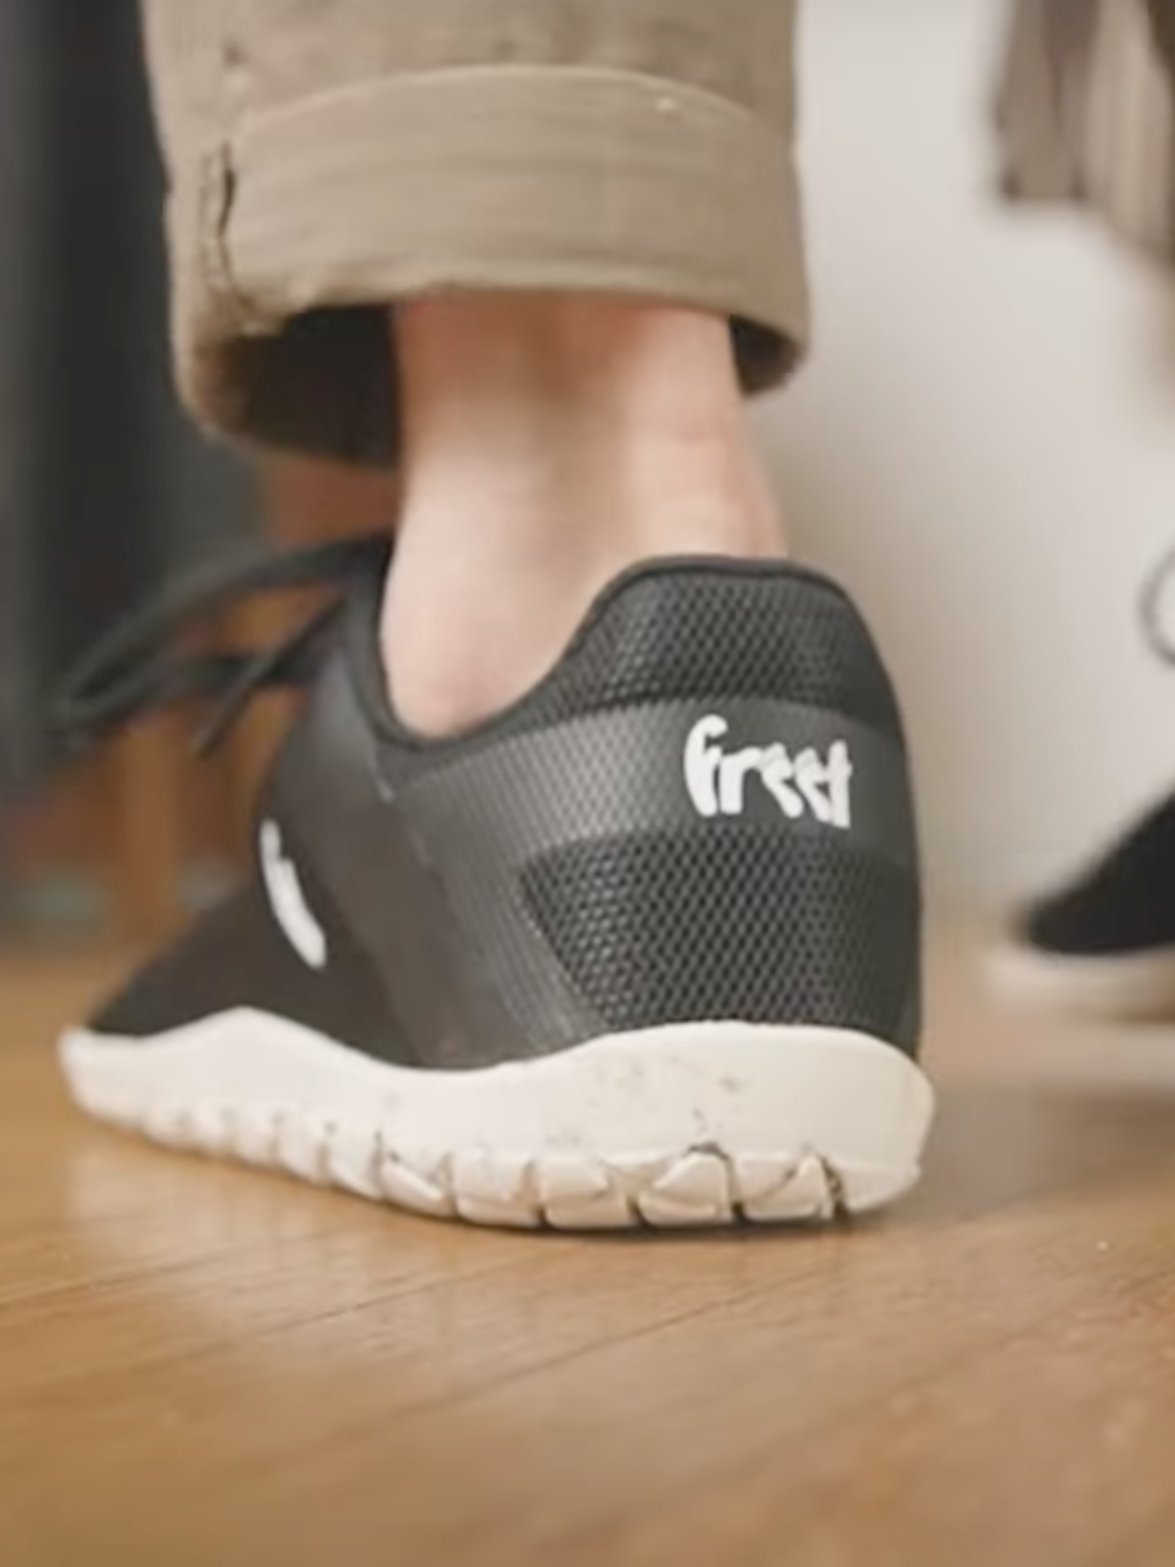 Person wearing black and white barefoot shoes with the word "first" written on the heel, stepping onto a wooden floor.